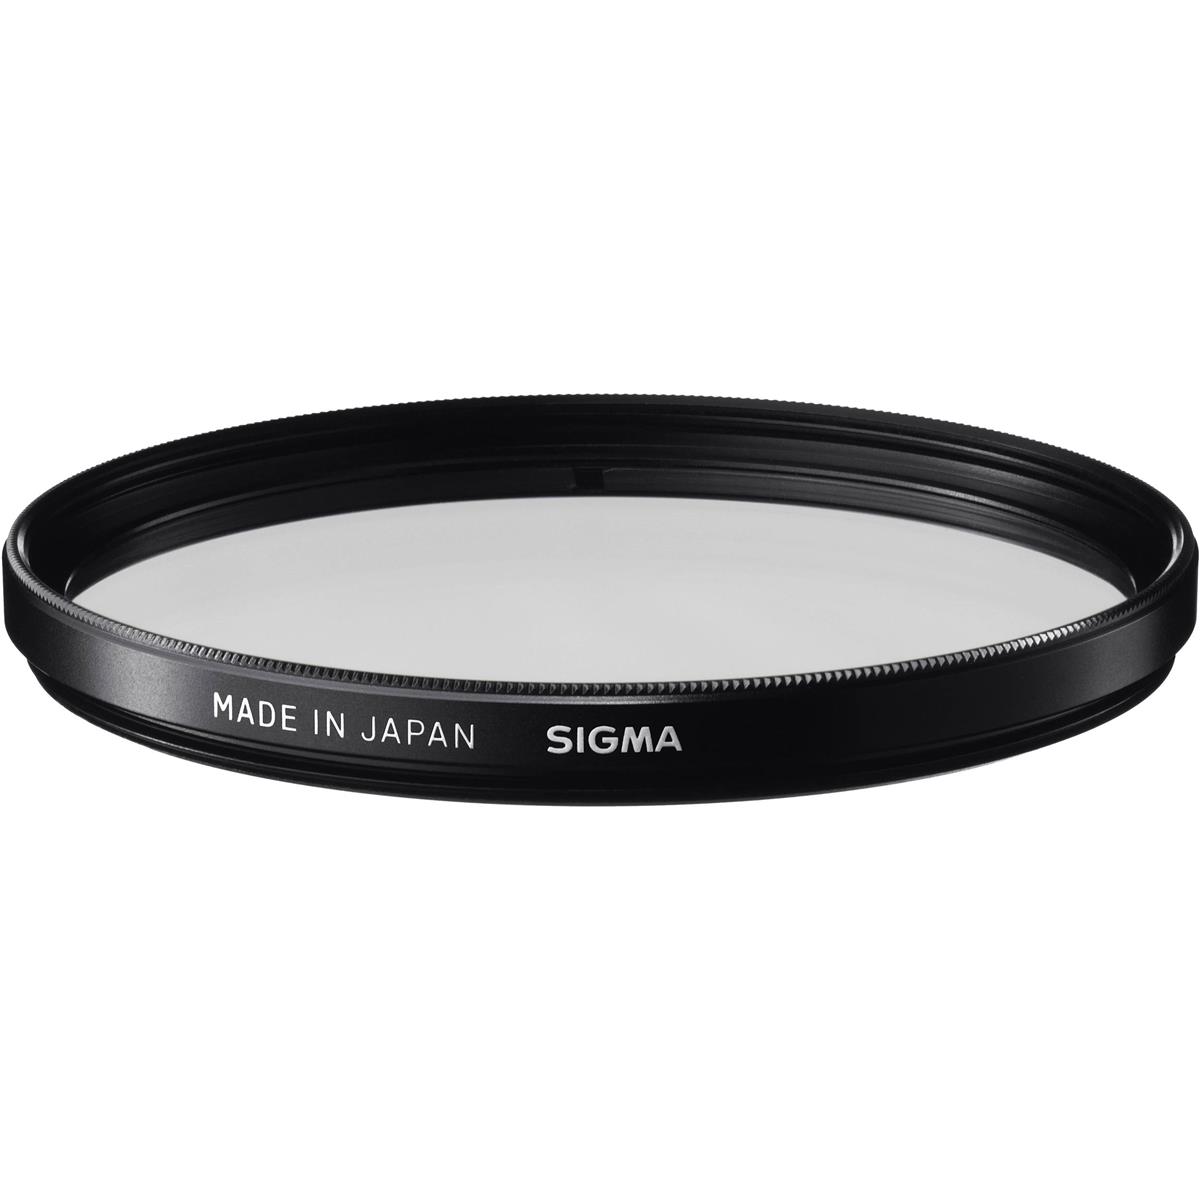 Sigma 62mm WR UV Filter - Water & Oil Repellent & Antistatic